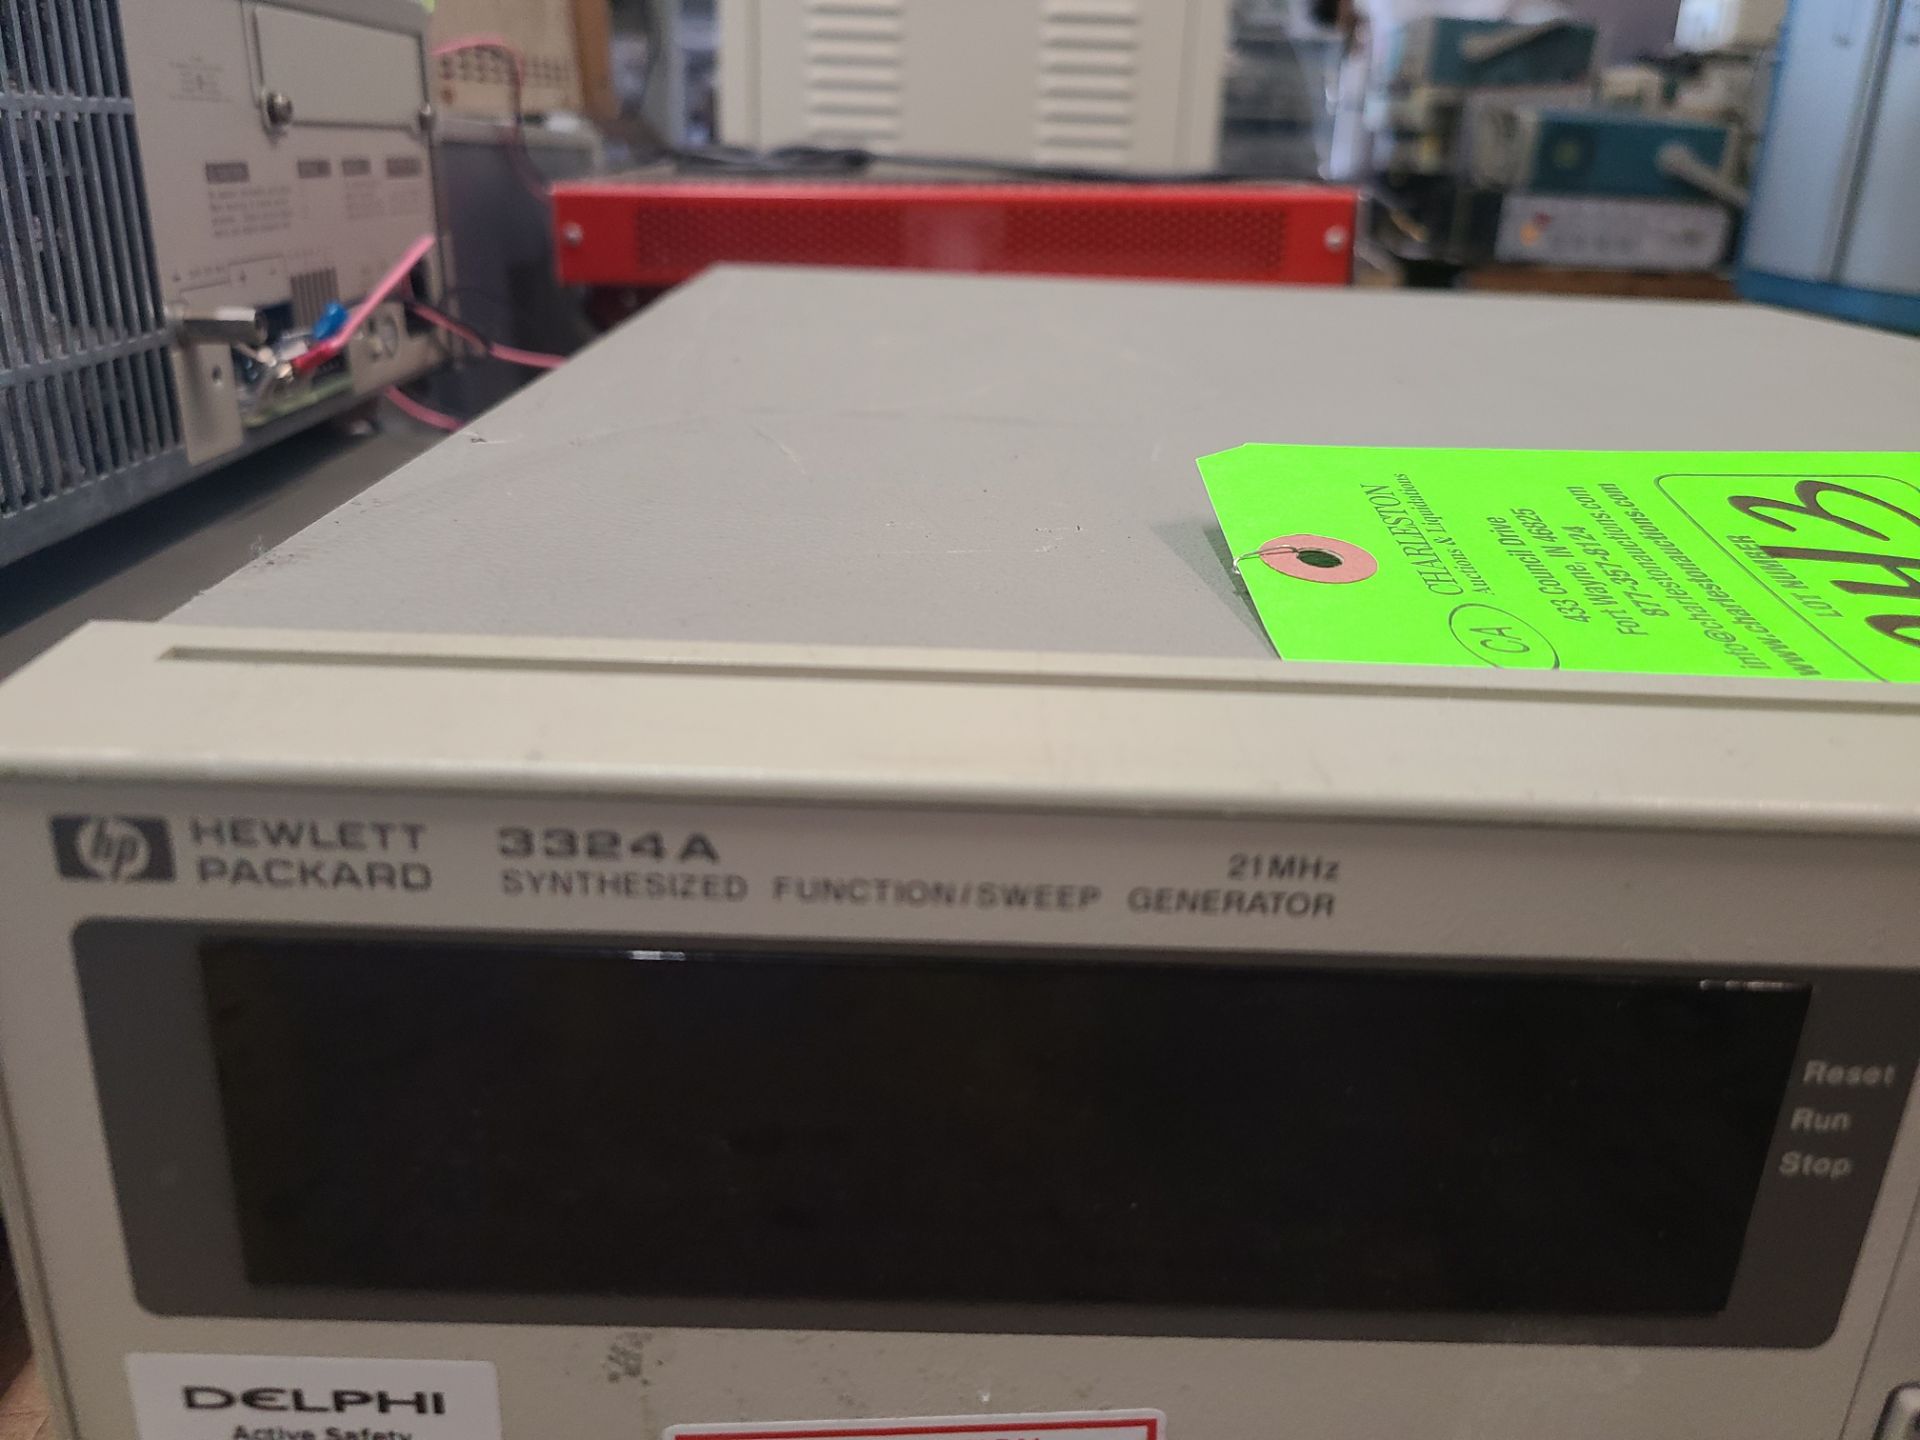 HP 3324A SYNTHESIZED FUNCTION / SWEEP GENERATOR - Image 2 of 2